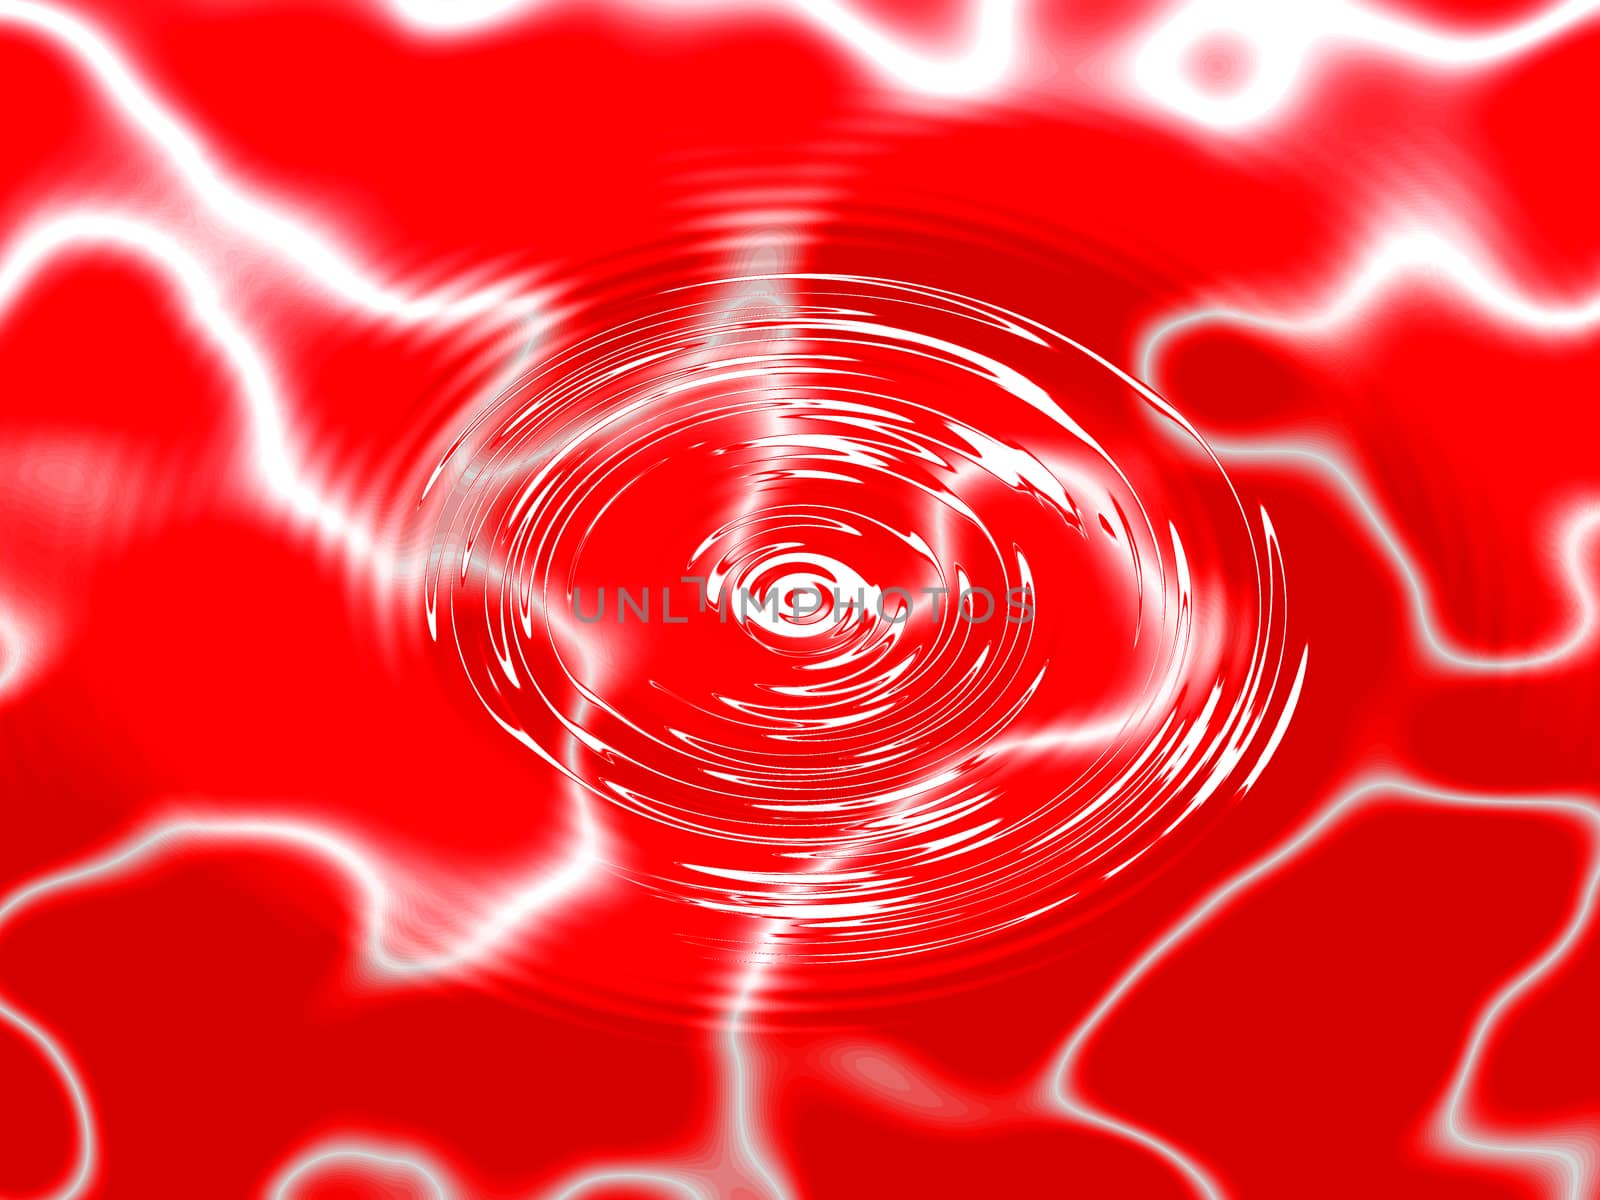 Abstract rotating swirling background with red water drops.